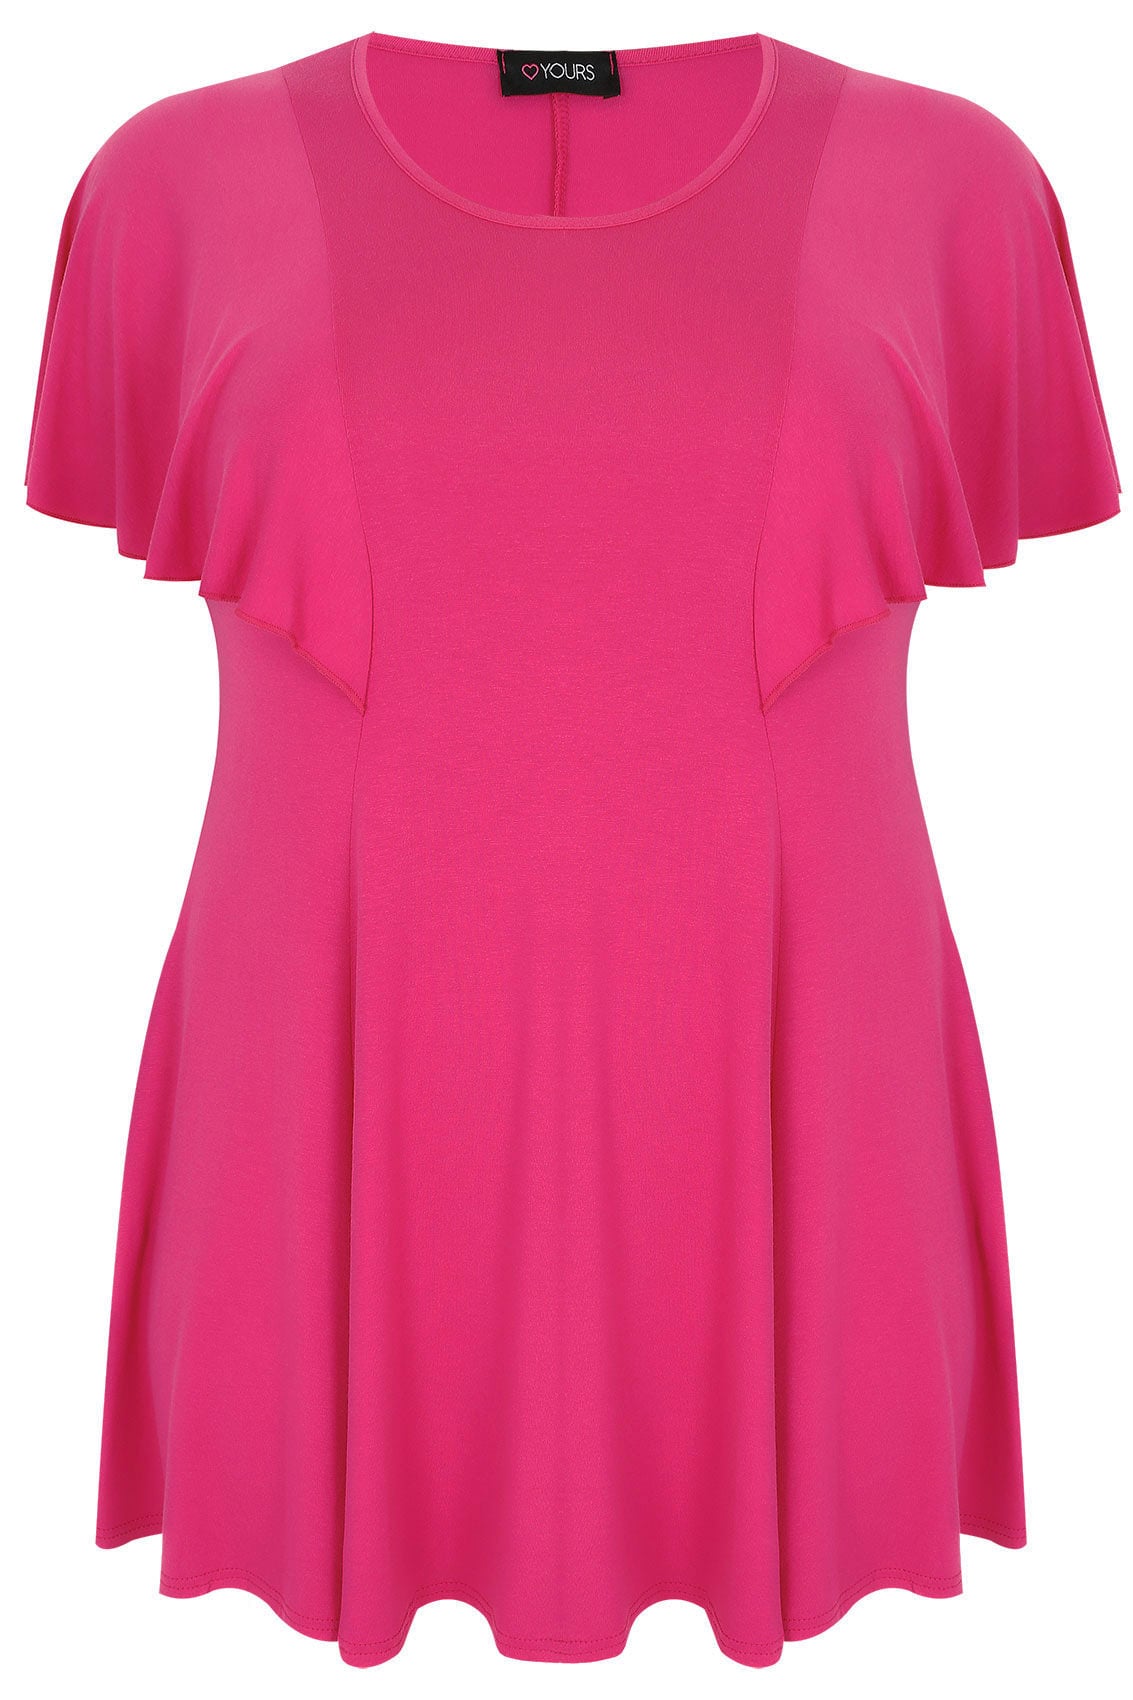 Hot Pink Peplum Top With Frill Angel Sleeves, Plus size 16 